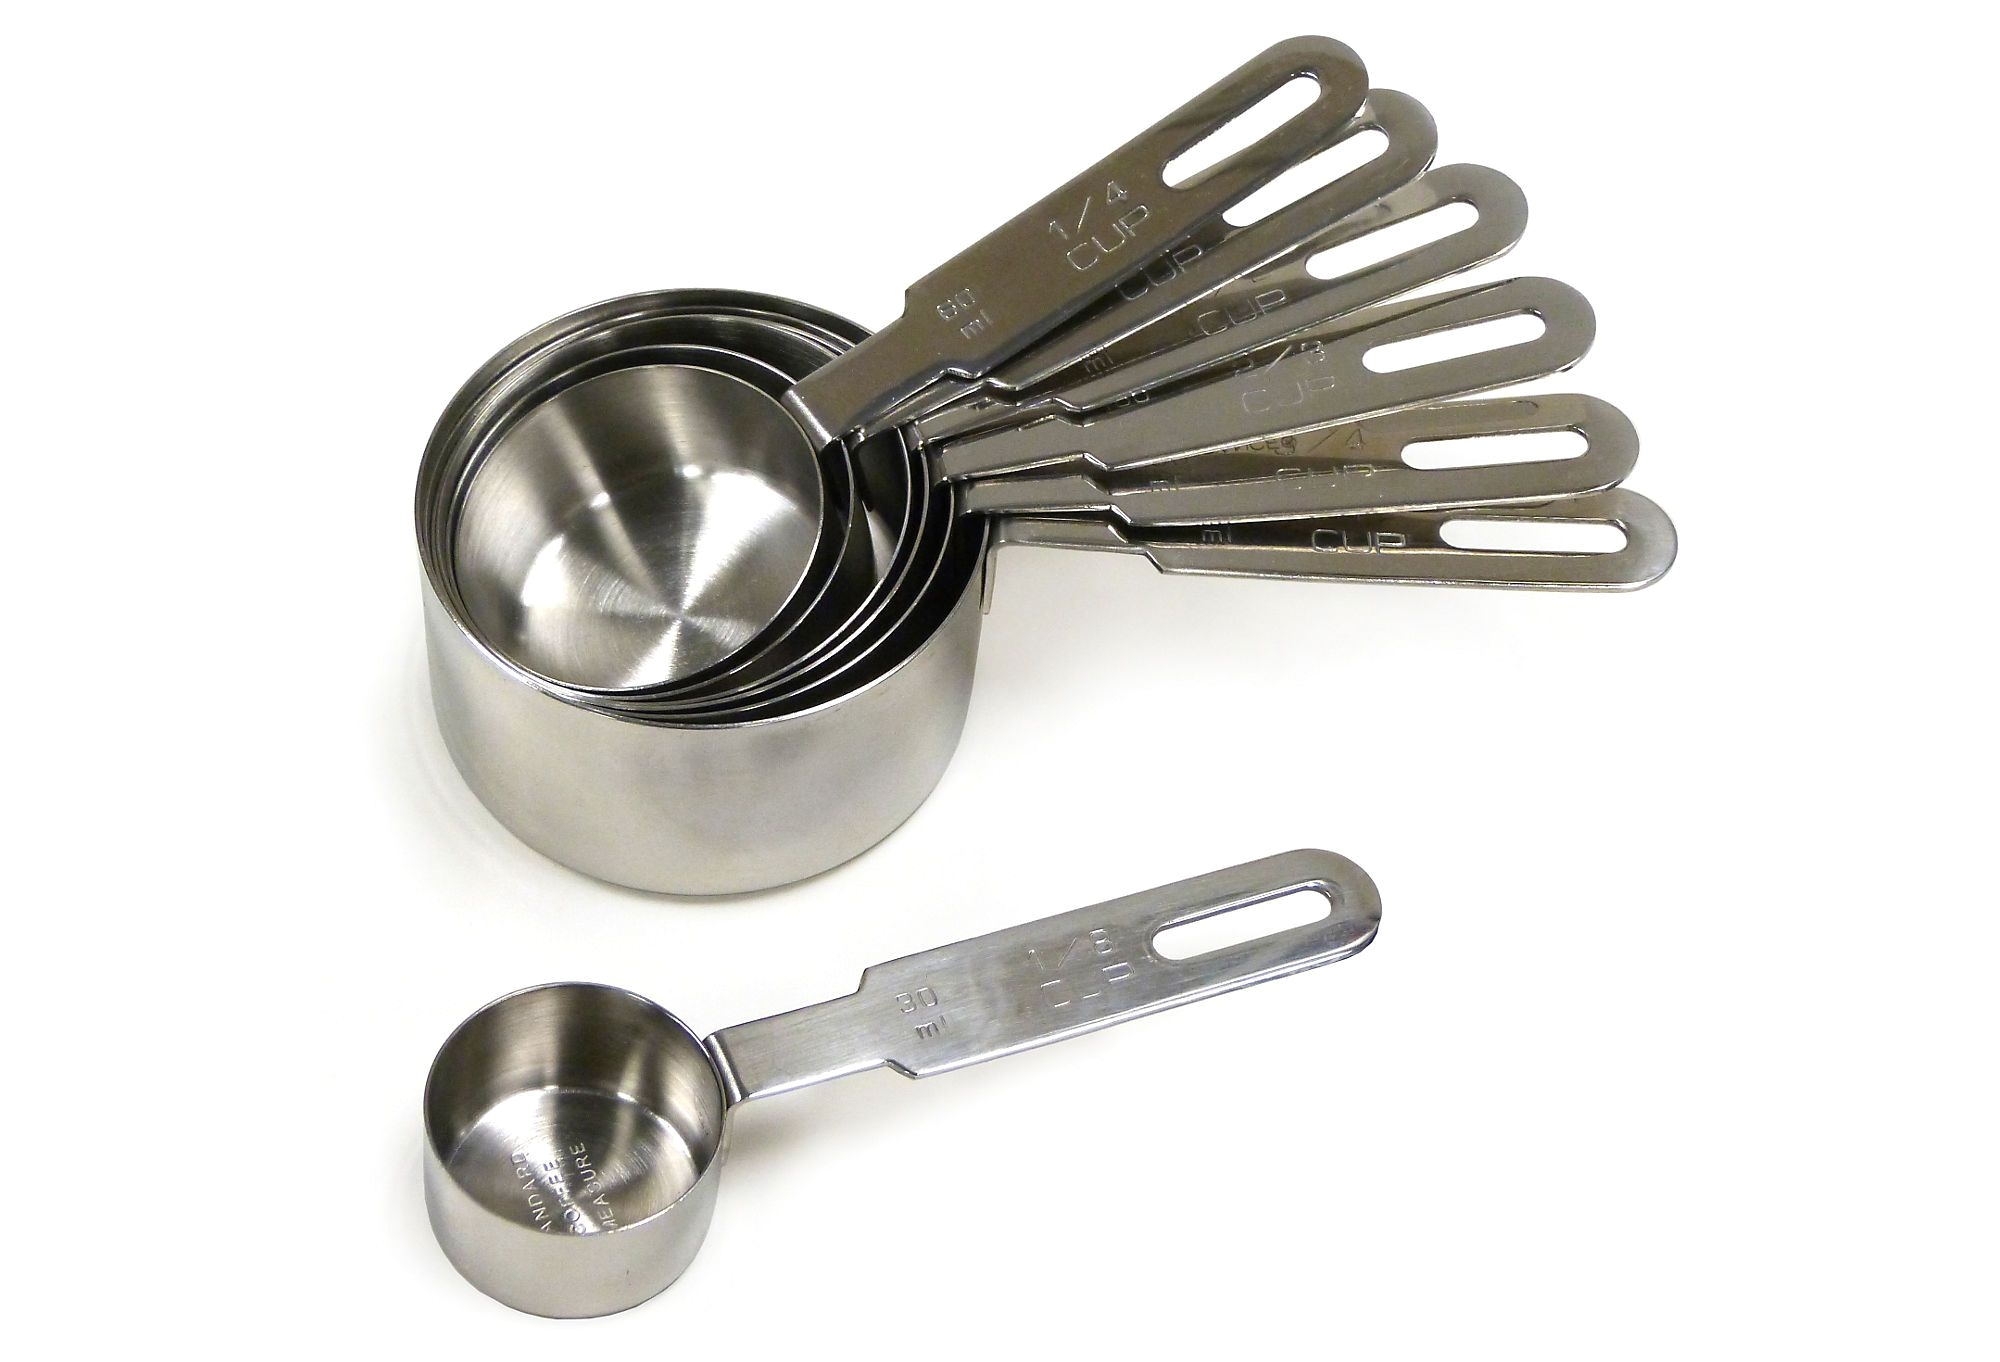 stainless steel measuring cups and spoons give a nice clink when using